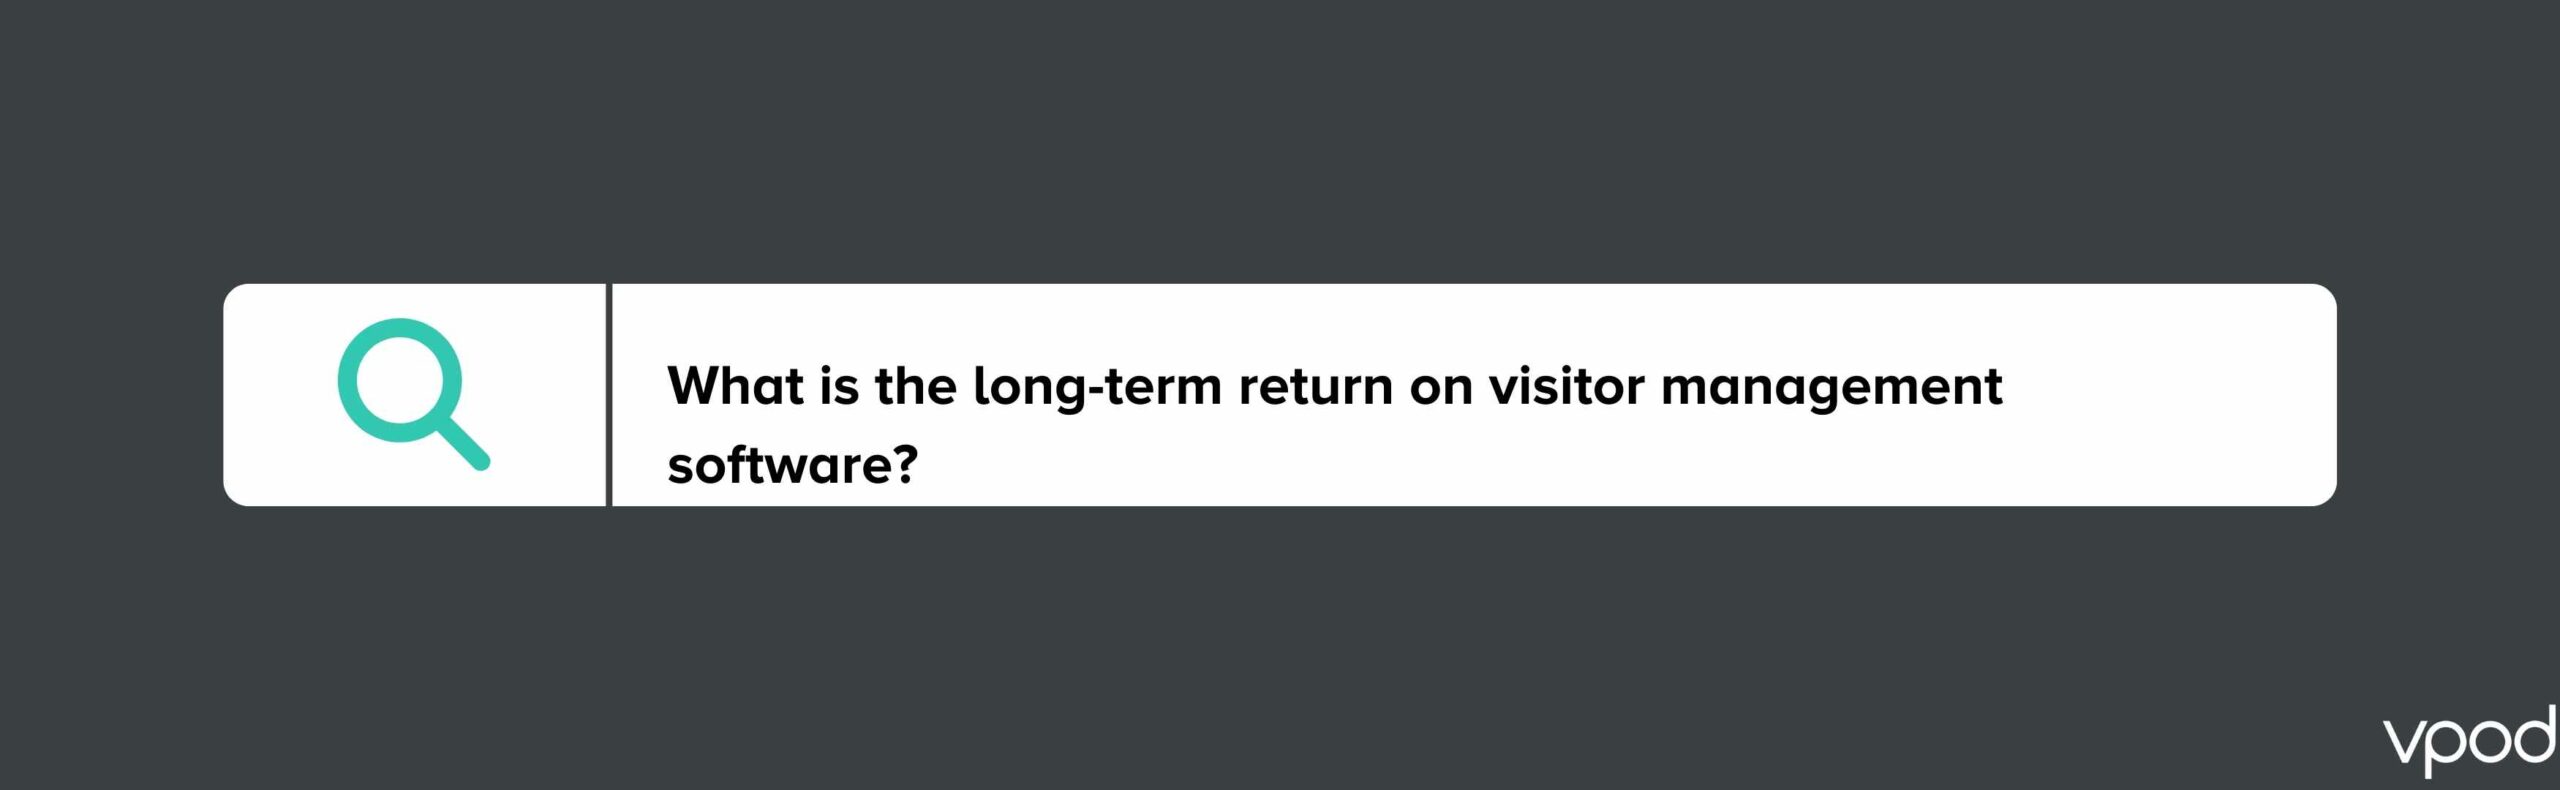 what-is-the-long-term-return-on-vms